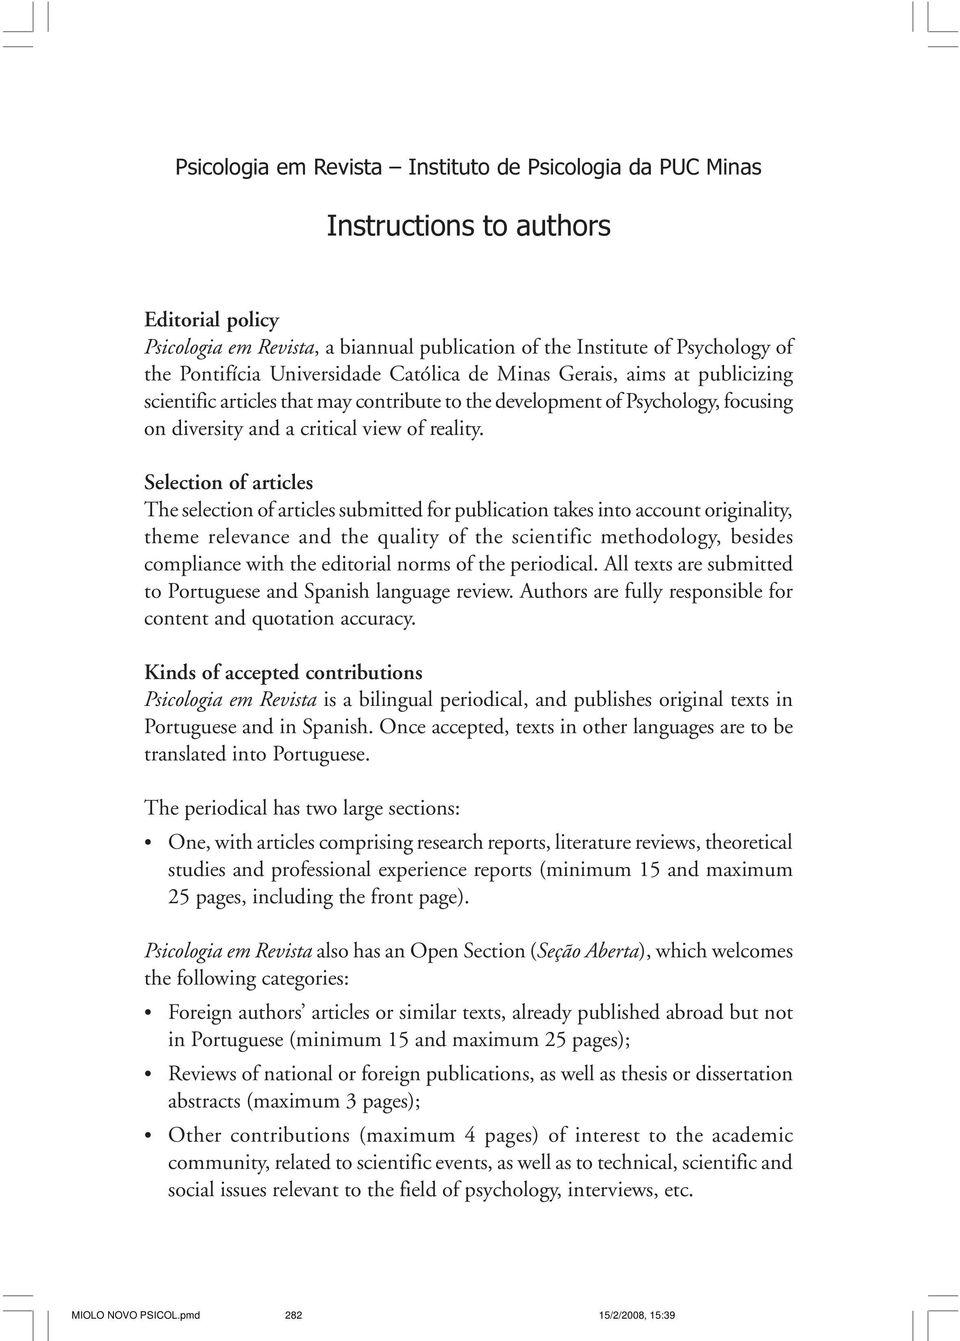 Selection of articles The selection of articles submitted for publication takes into account originality, theme relevance and the quality of the scientific methodology, besides compliance with the